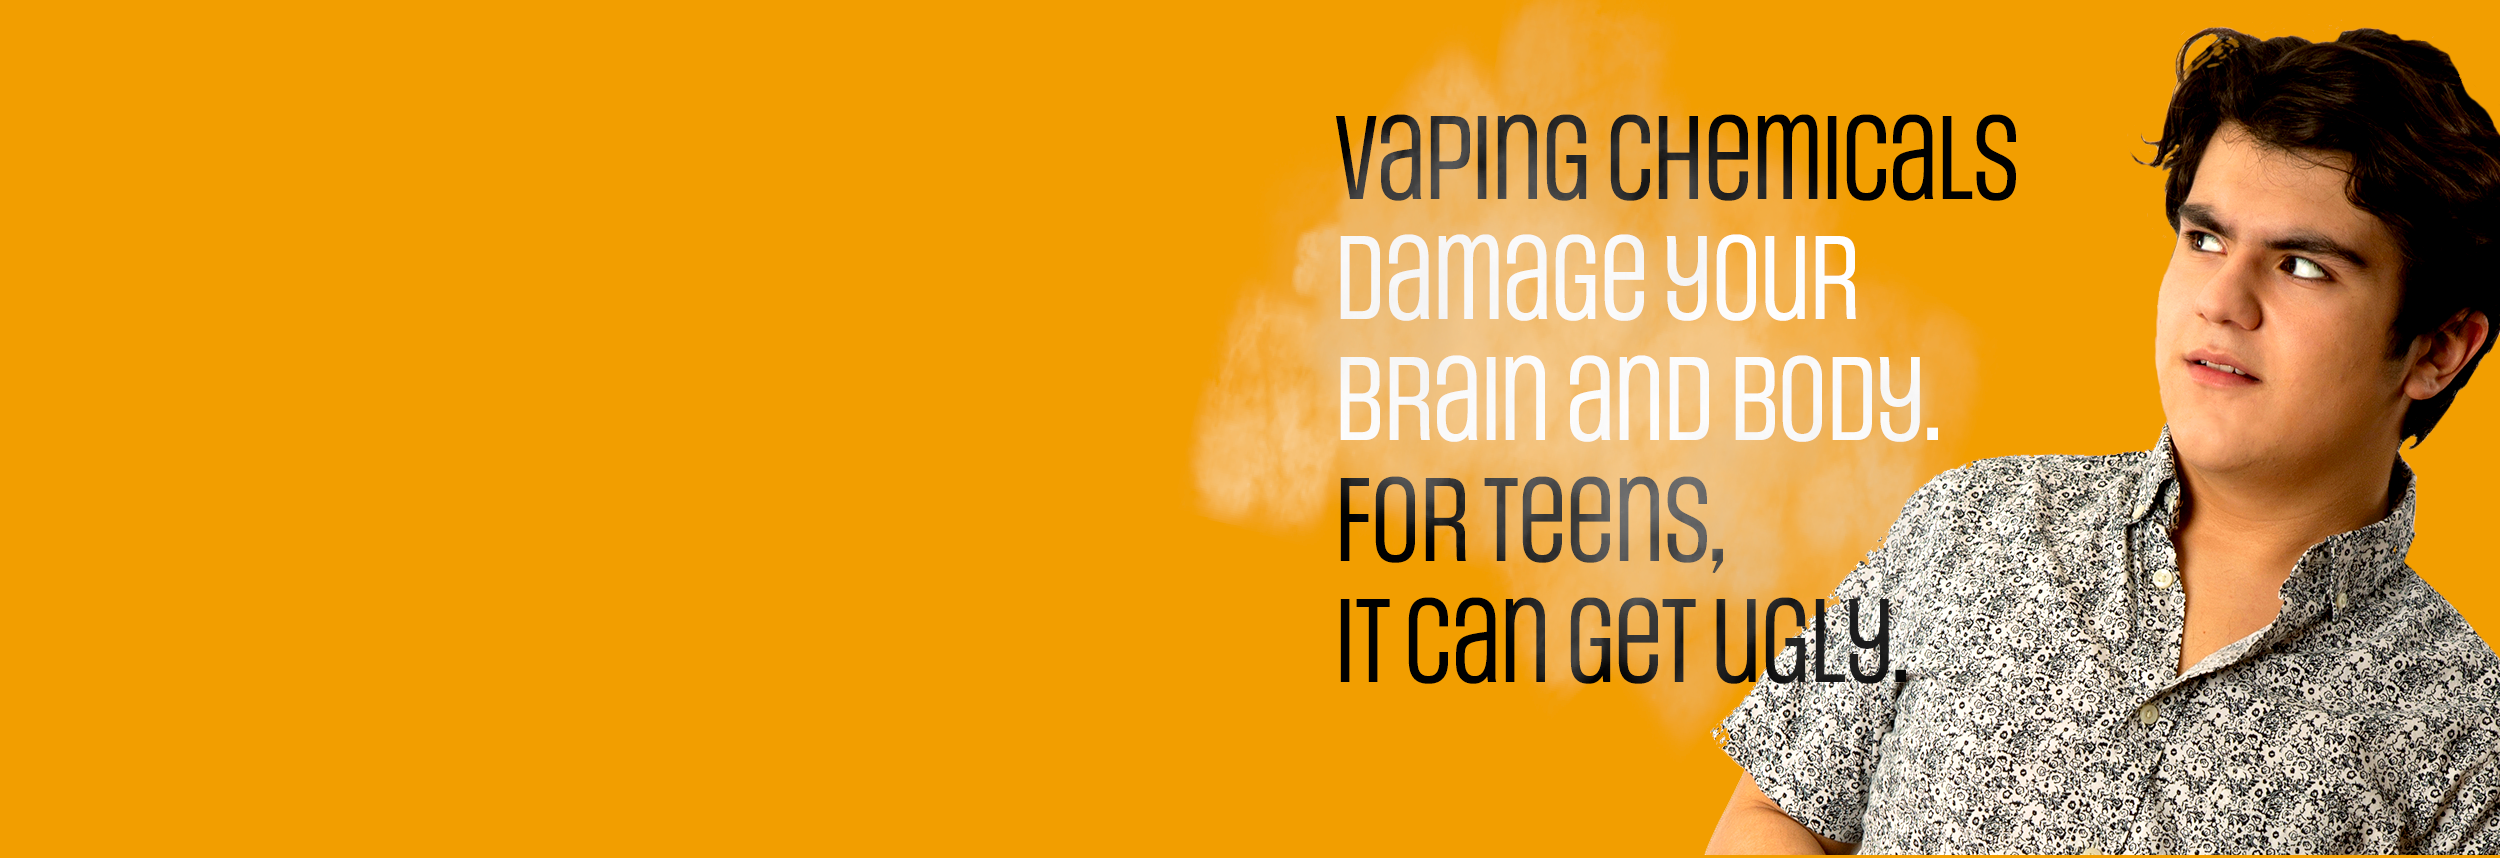 Vaping chemicals damage your brain and body. For teens, it can get ugly.